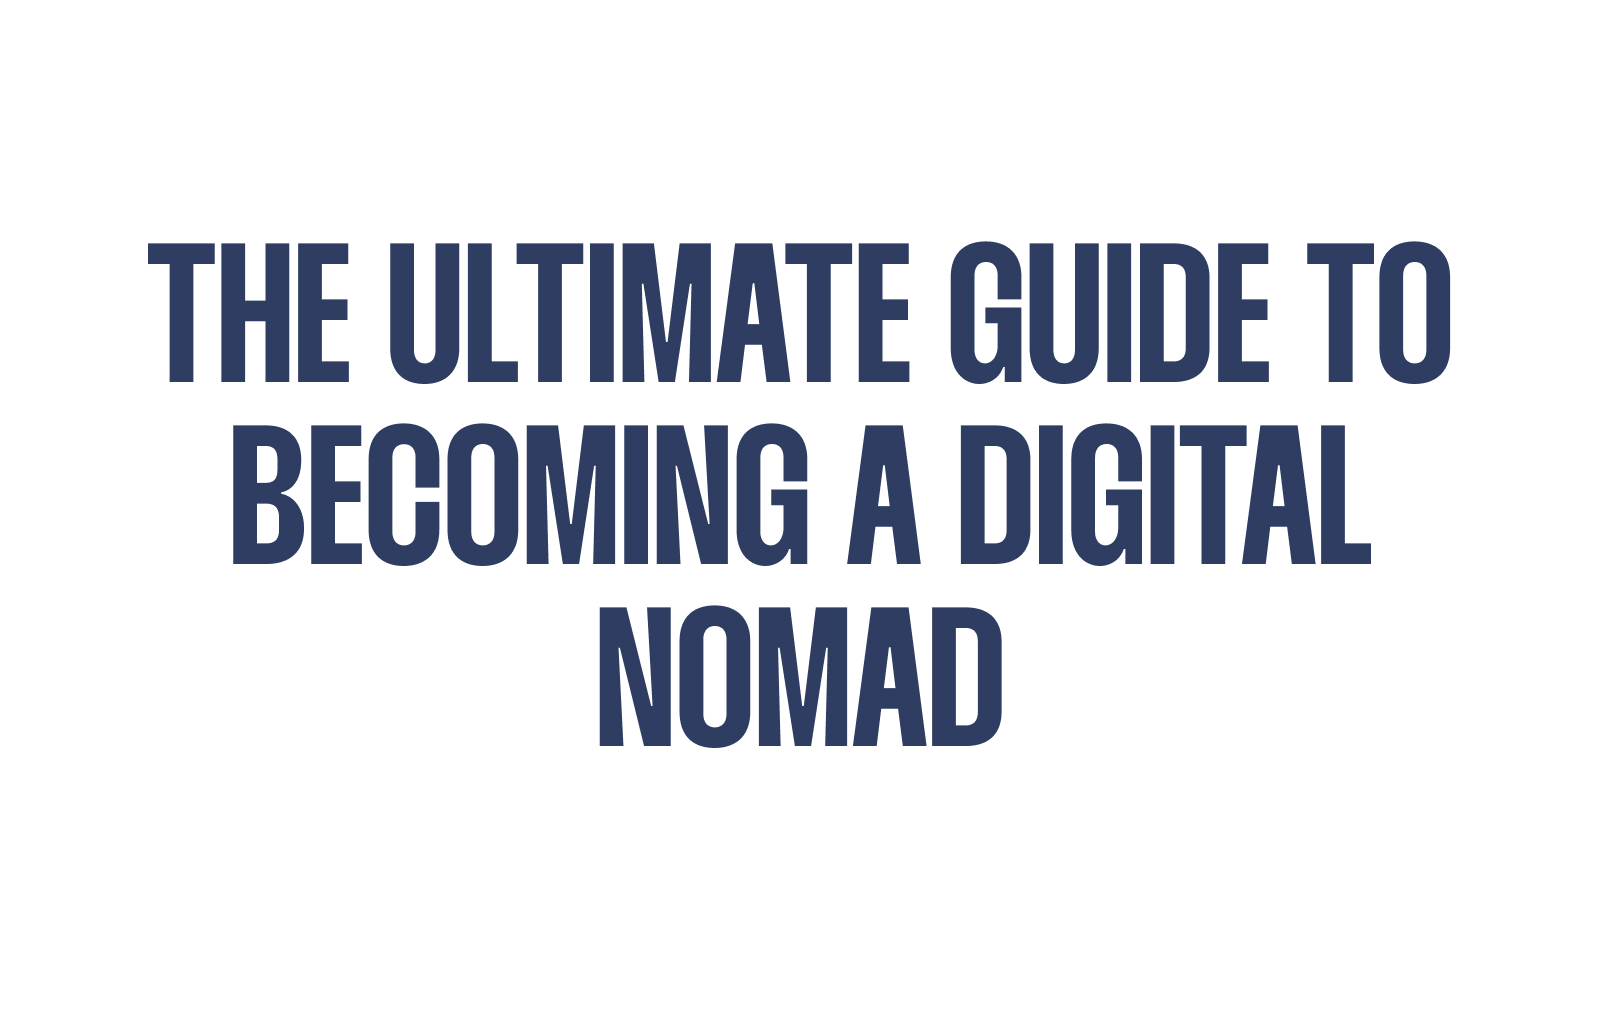 The Ultimate Guide to Becoming a Digital Nomad and Working Online From Anywhere